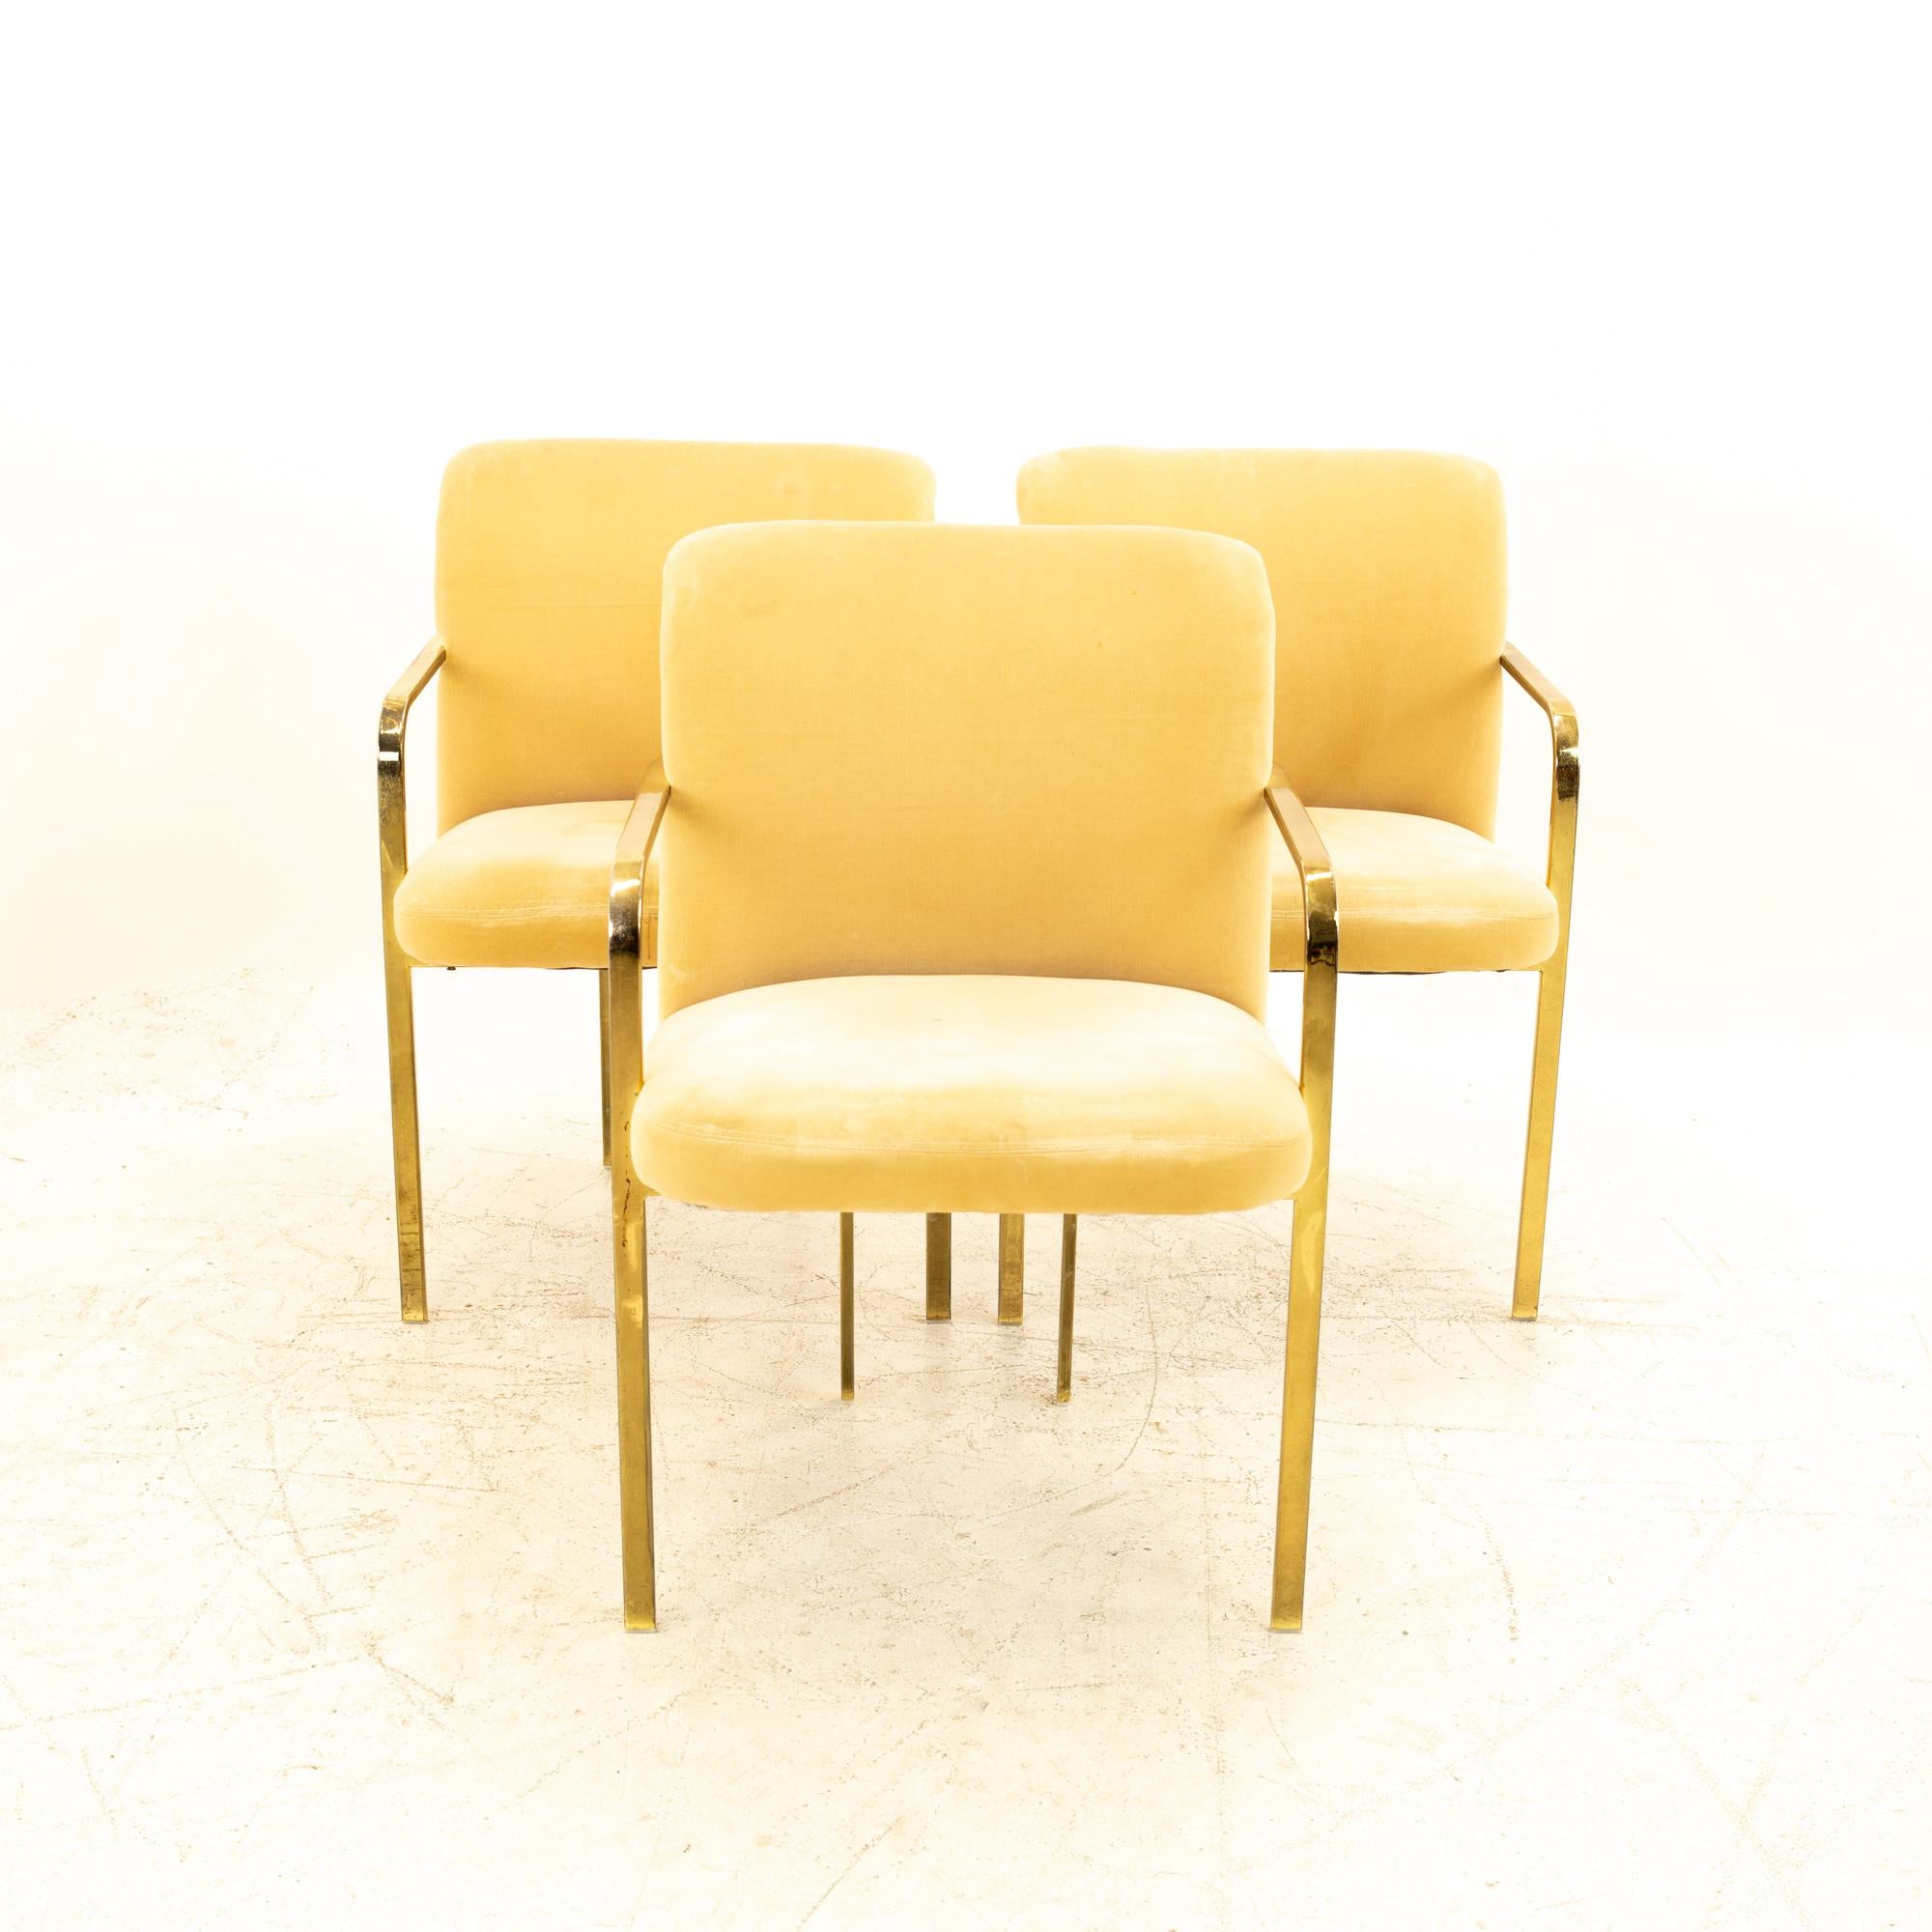 Milo Baughman style Mid Century brass dining chairs - Set of 3
Each chair measures: 22 wide x 23 deep x 33 high, with a seat height of 18 inches

All pieces of furniture can be had in what we call restored vintage condition. This means the piece is